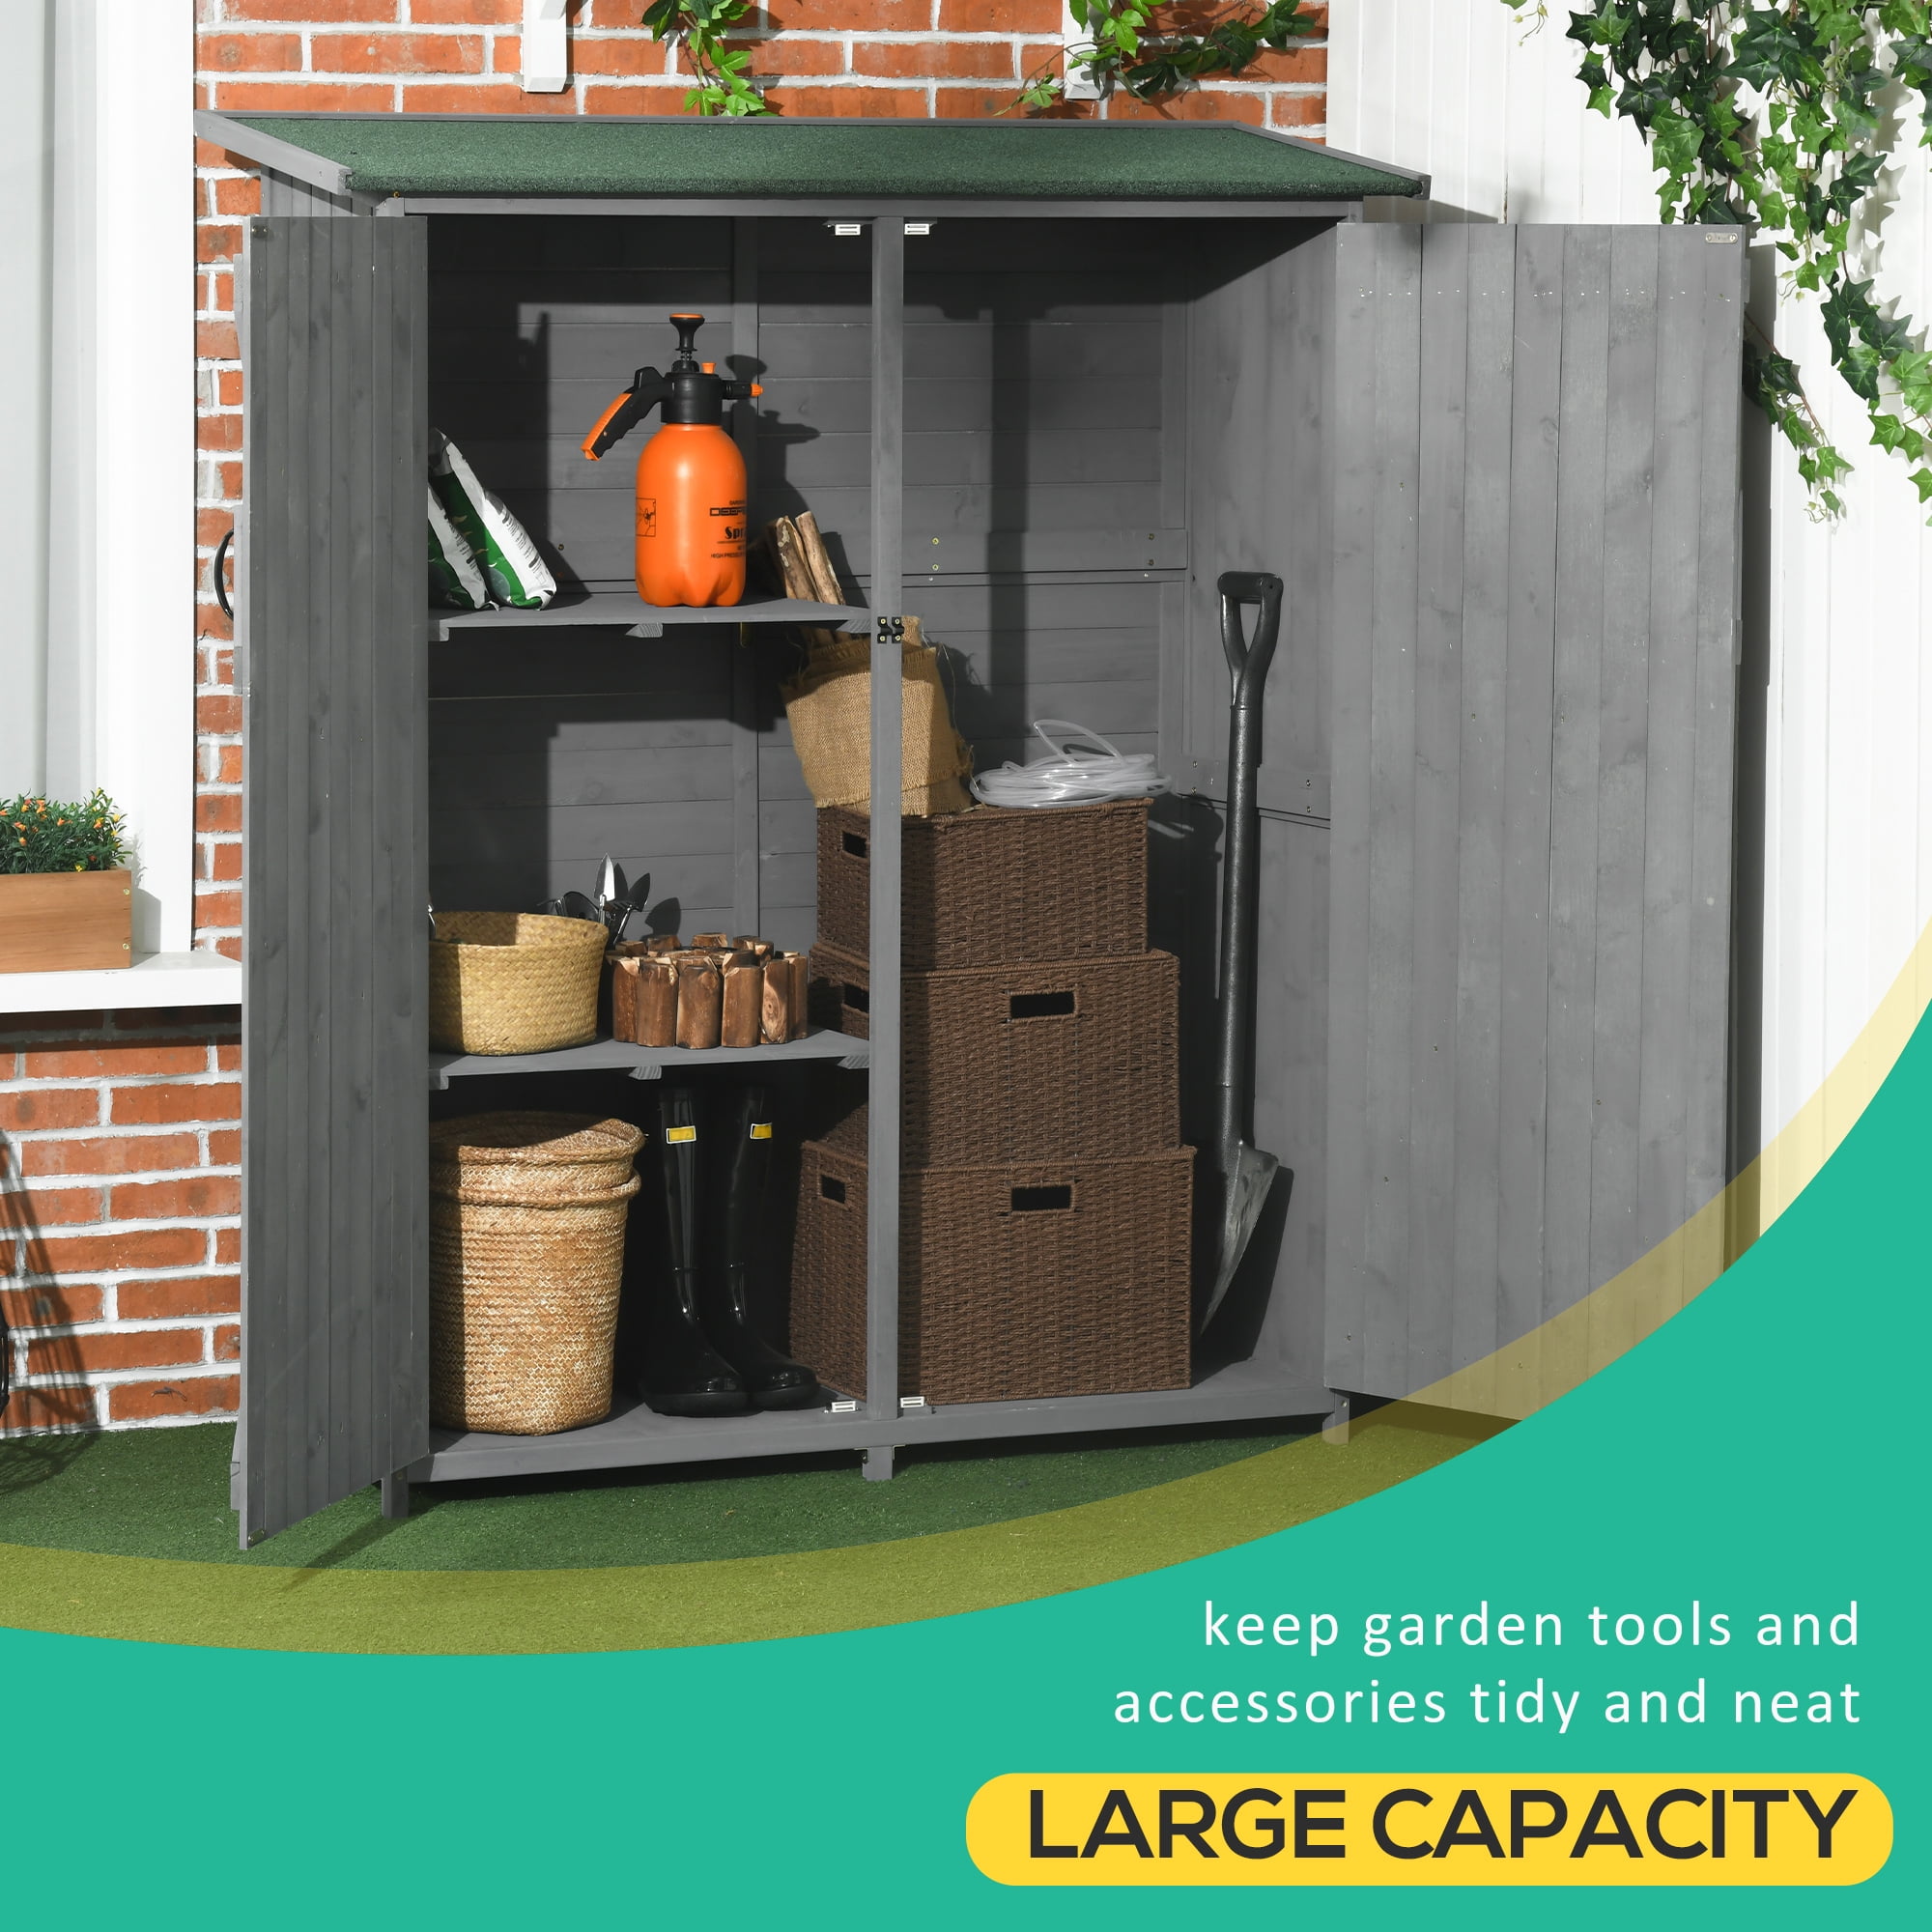  EAST OAK Outdoor Storage Shed, 53Cu.ft Vertical Resin Tool 4 x  6.6 FT Cabinet w/o Shelf for Garden, Patio, Backyard, All-Weather Outdoor Storage  Clearance, Lockable with Floor : Patio, Lawn